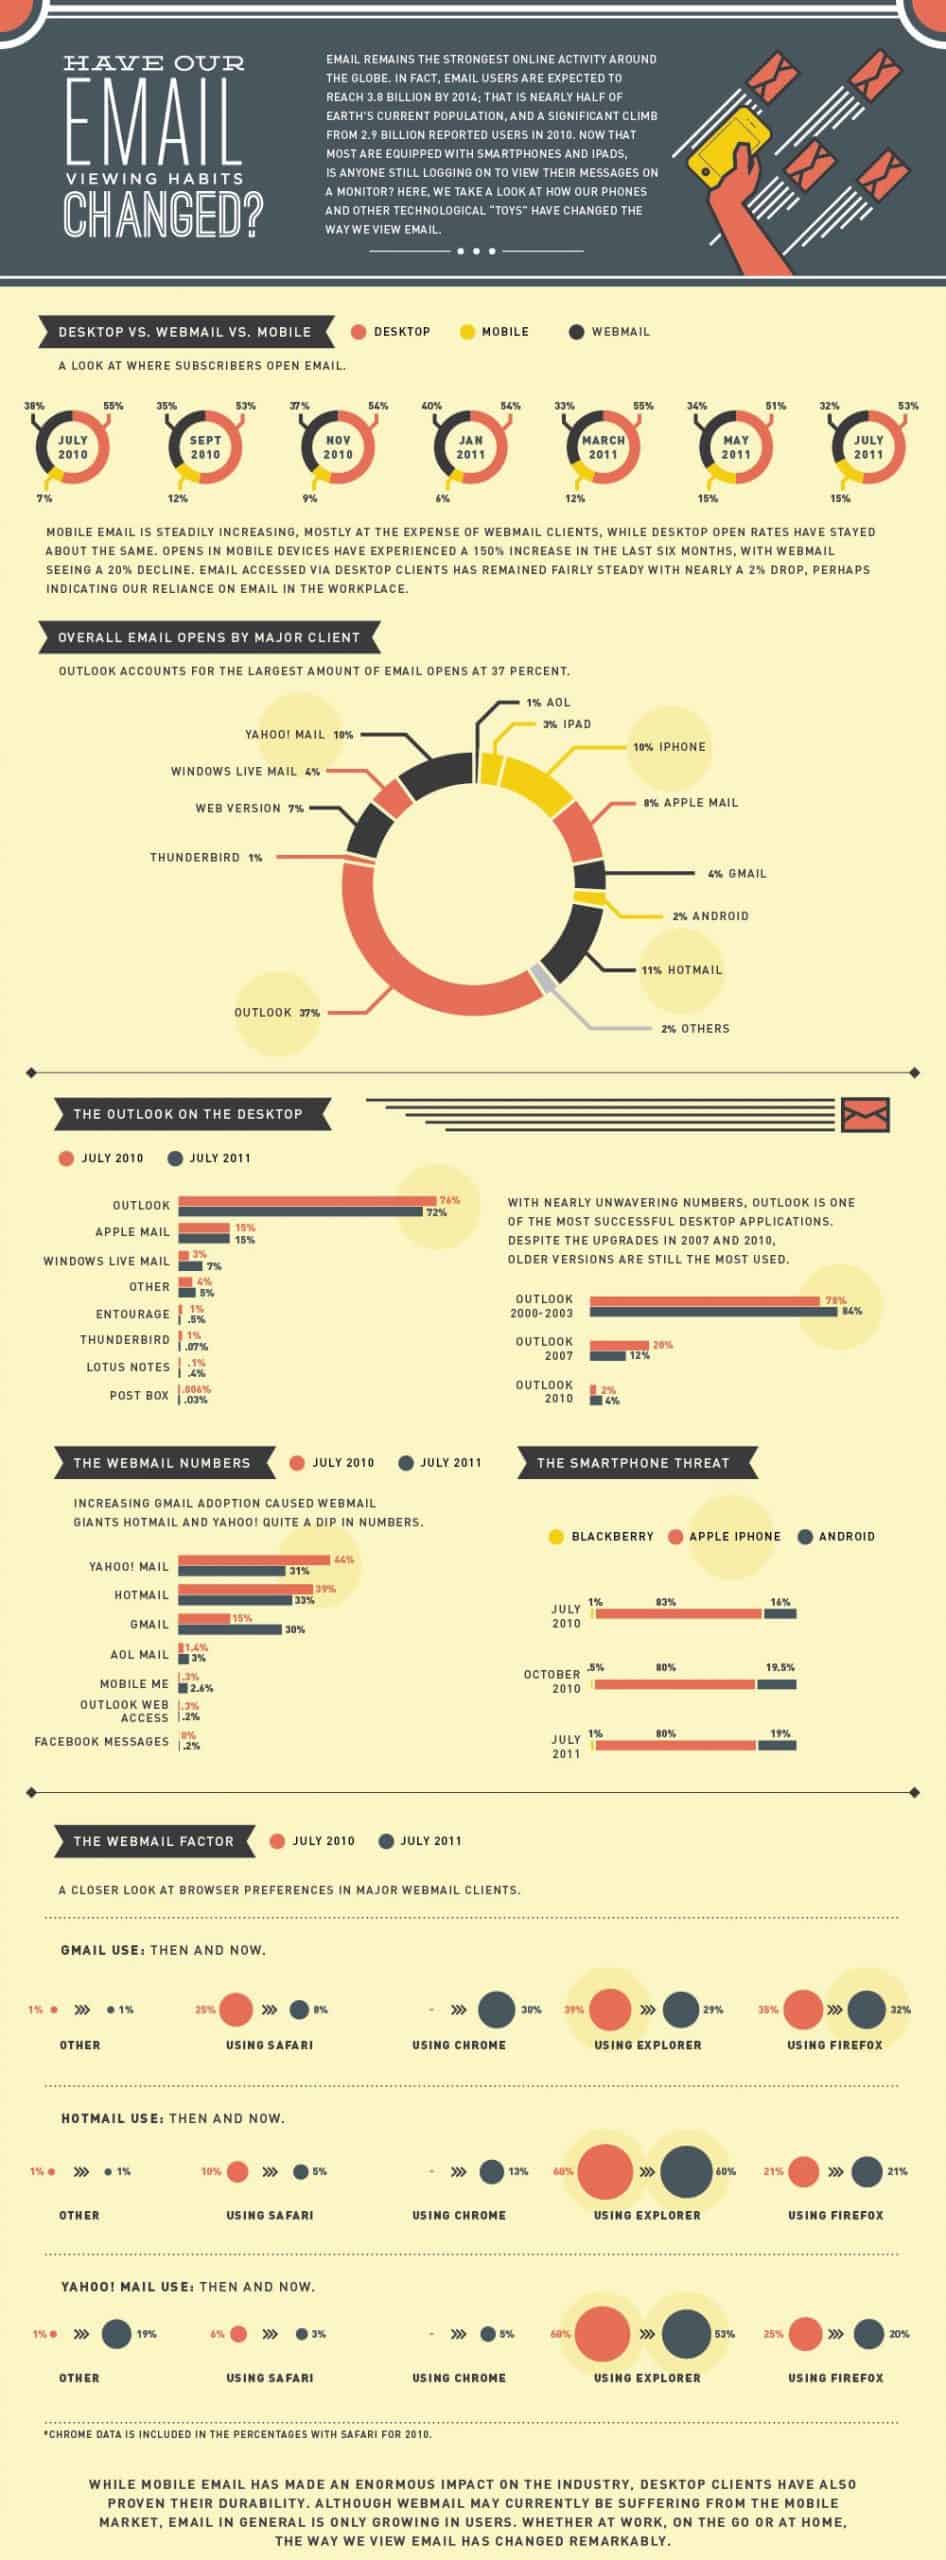 Email-Viewing-Habits-Changed-Infographic